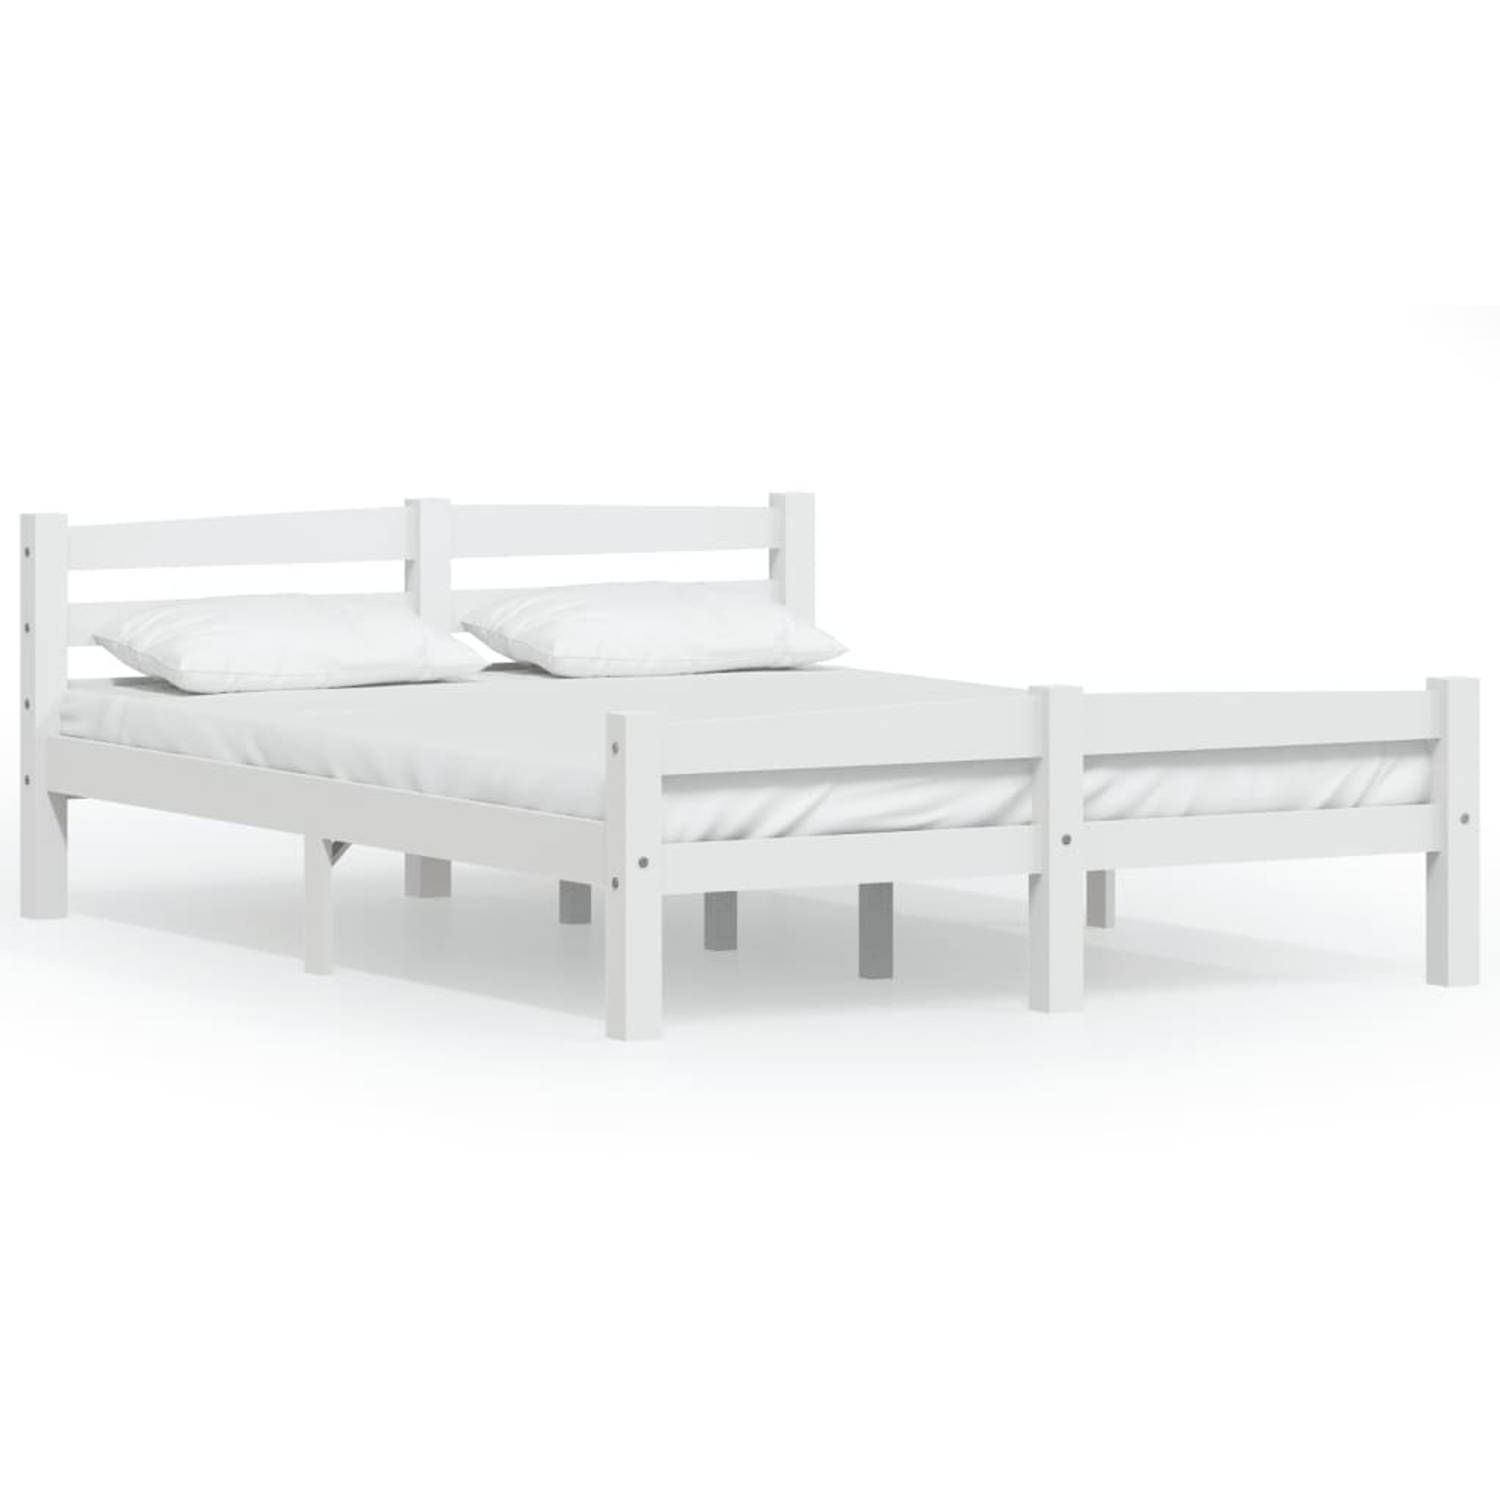 The Living Store Bedframe massief grenenhout wit 140x200 cm - Bedframe - Bedframe - Bed Frame - Bed Frames - Bed - Bedden - 2-persoonsbed - 2-persoonsbedden - Tweepersoons Bed